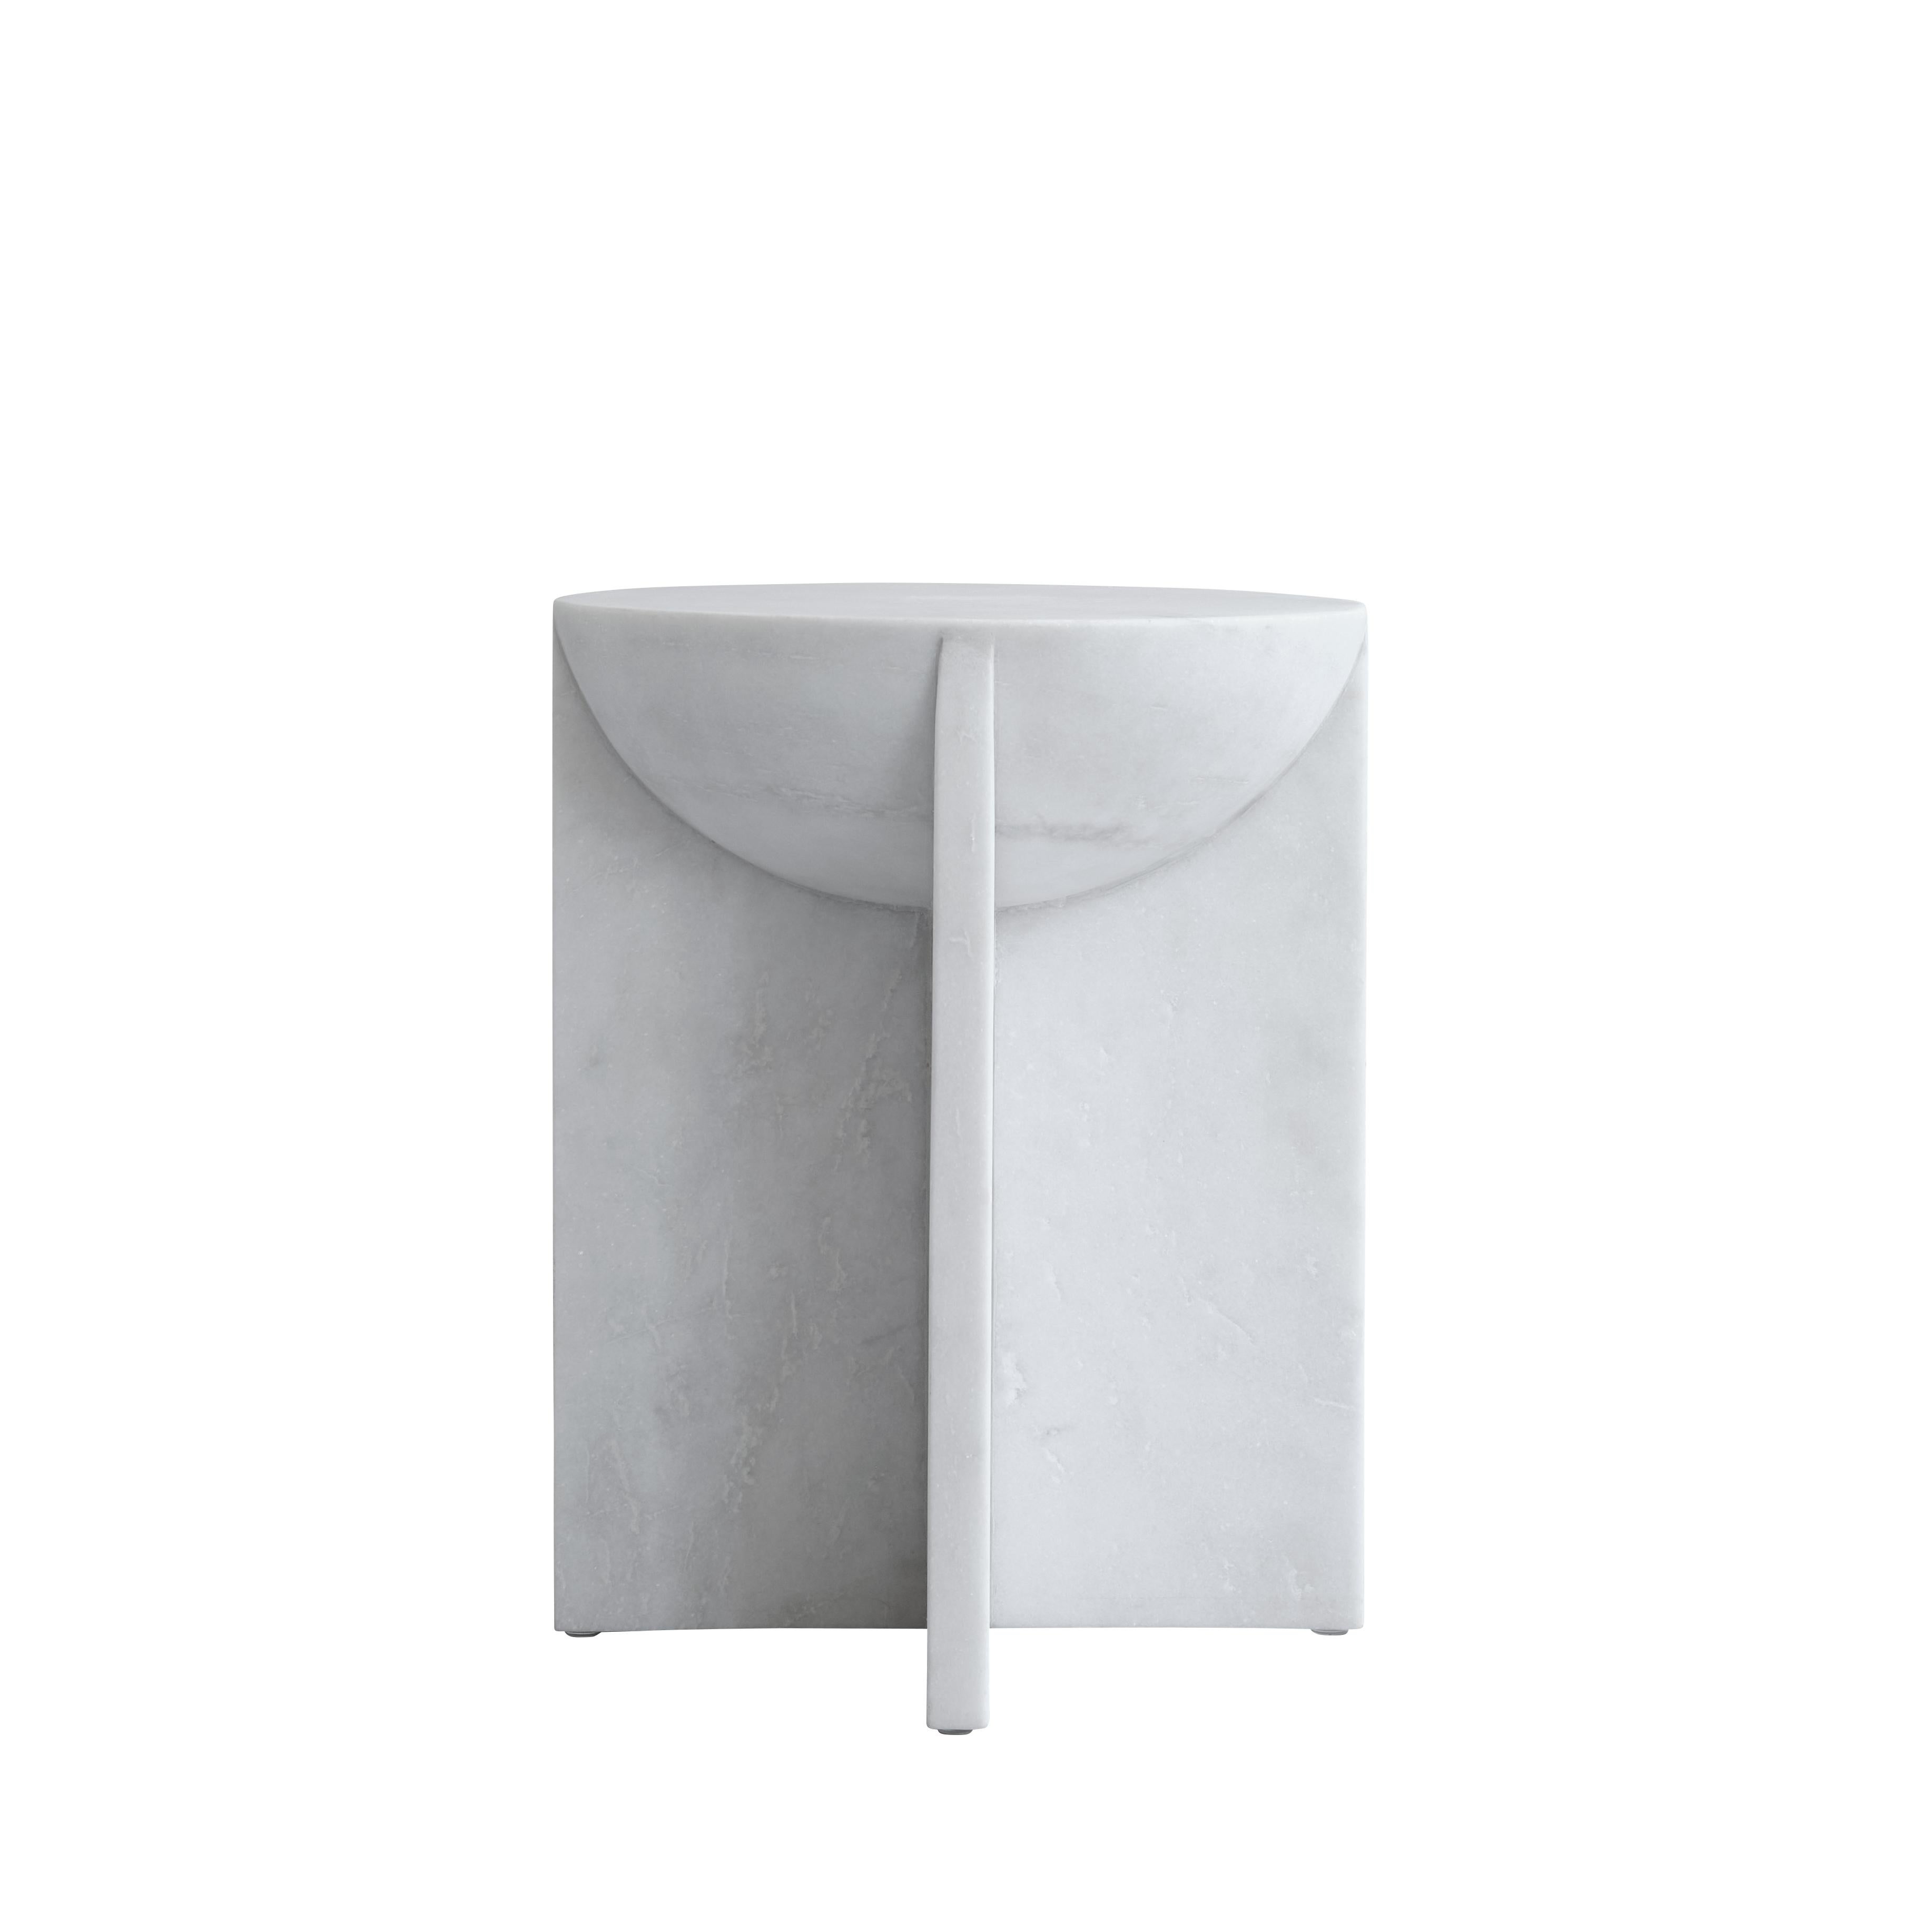 Marble cross side table / stool by 101 Copenhagen
Designed by Kristian Sofus Hansen & Tommy Hyldahl
Dimensions: L 35 / W 35 /H 45 cm.
Materials: marble

With its geometric shapes and sharp lines, Cross is inspired by architectural minimalism,